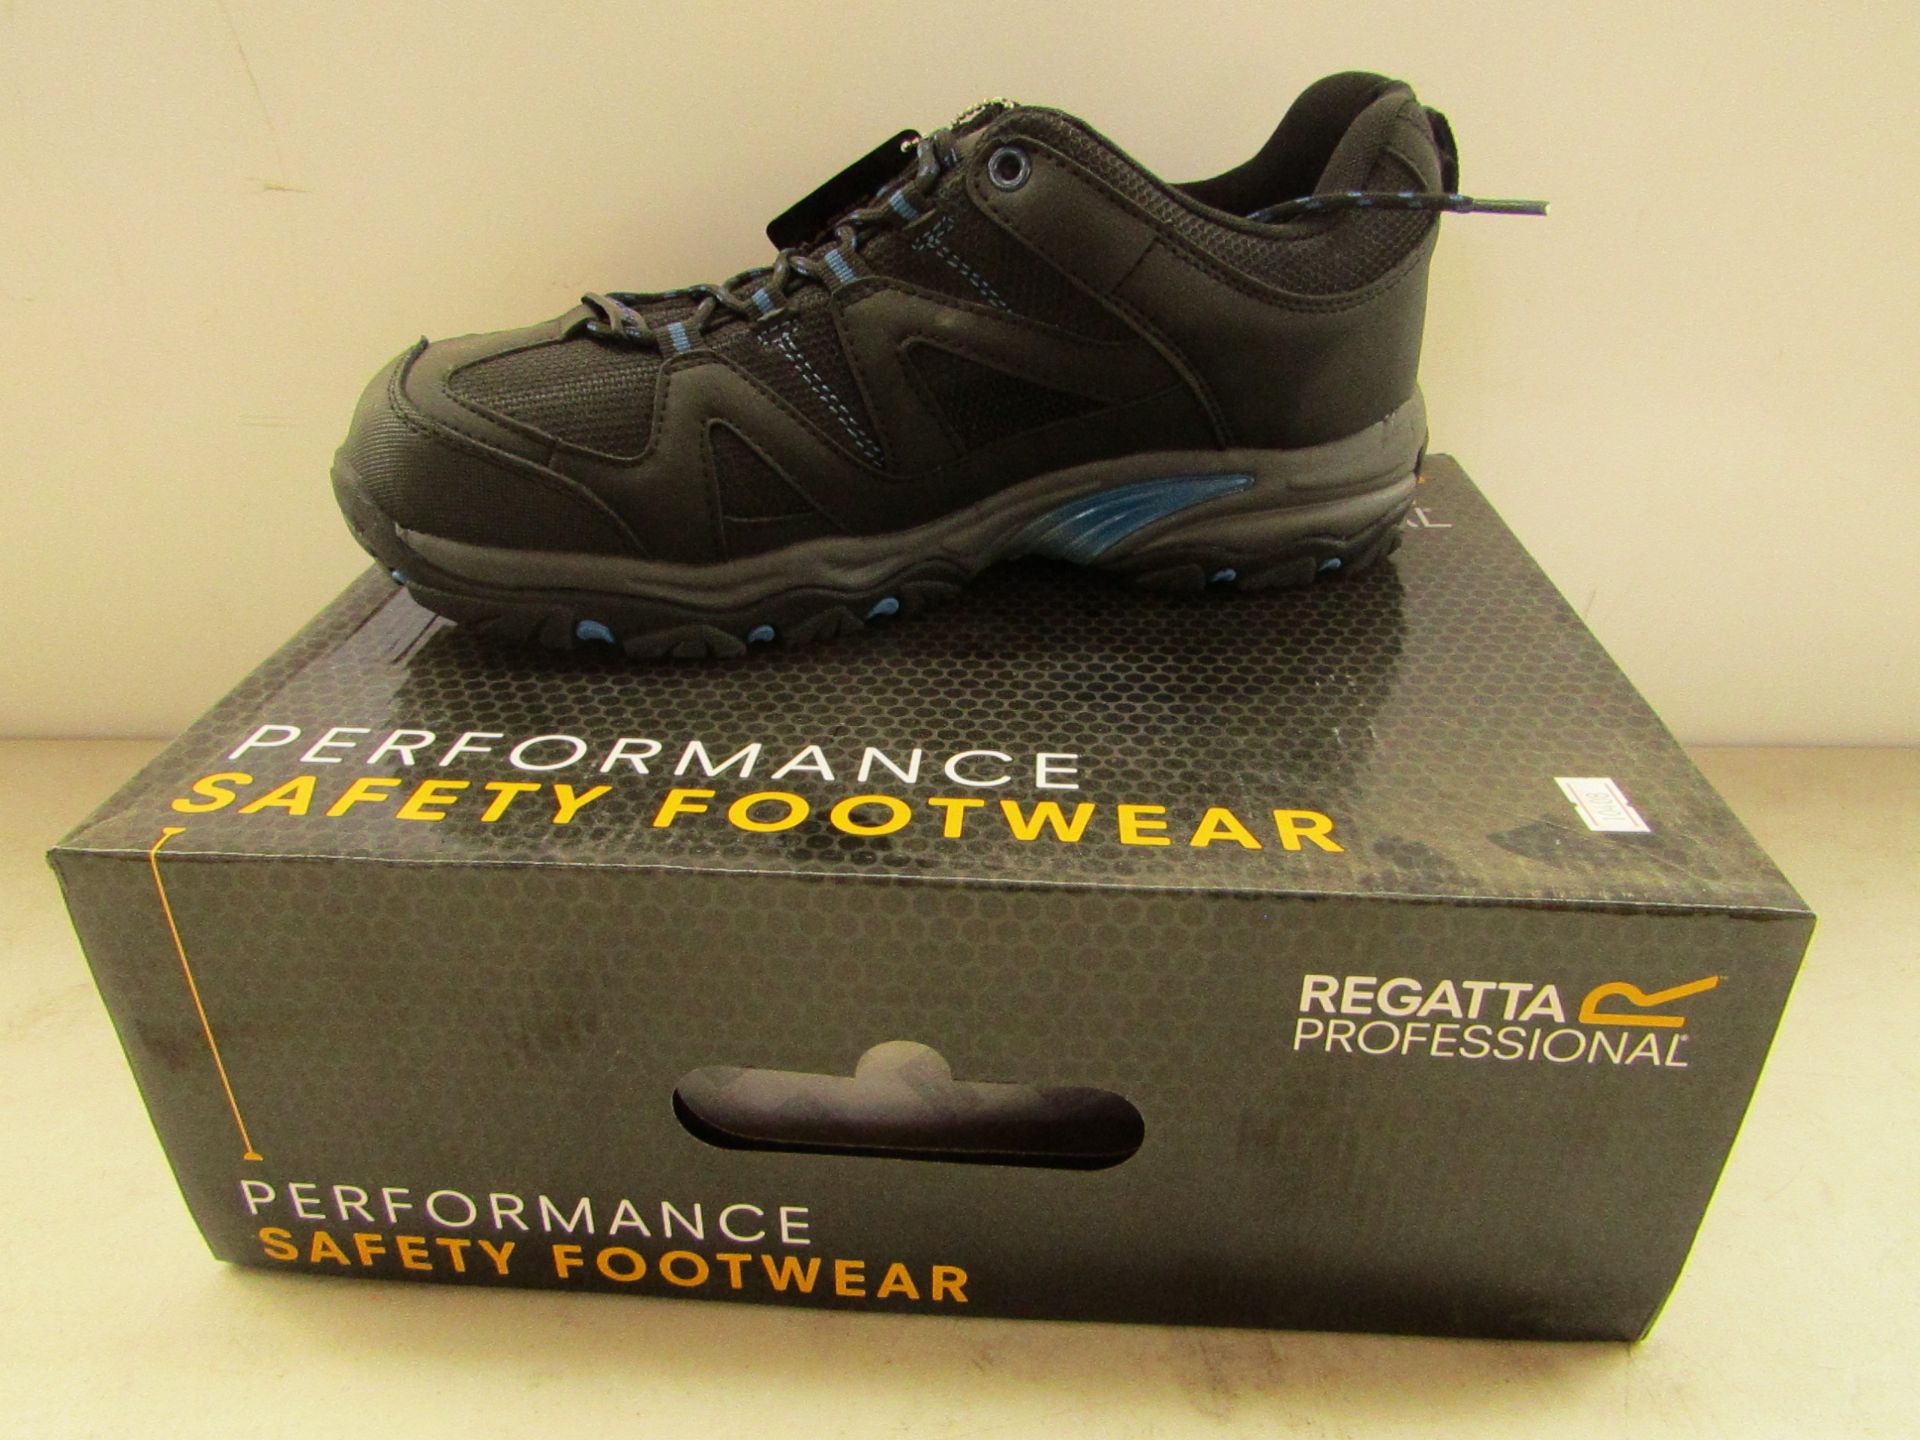 Regatta Professional Riverbeck steel toe cap safety trainers (Black and Blue colour), size UK10, RRP